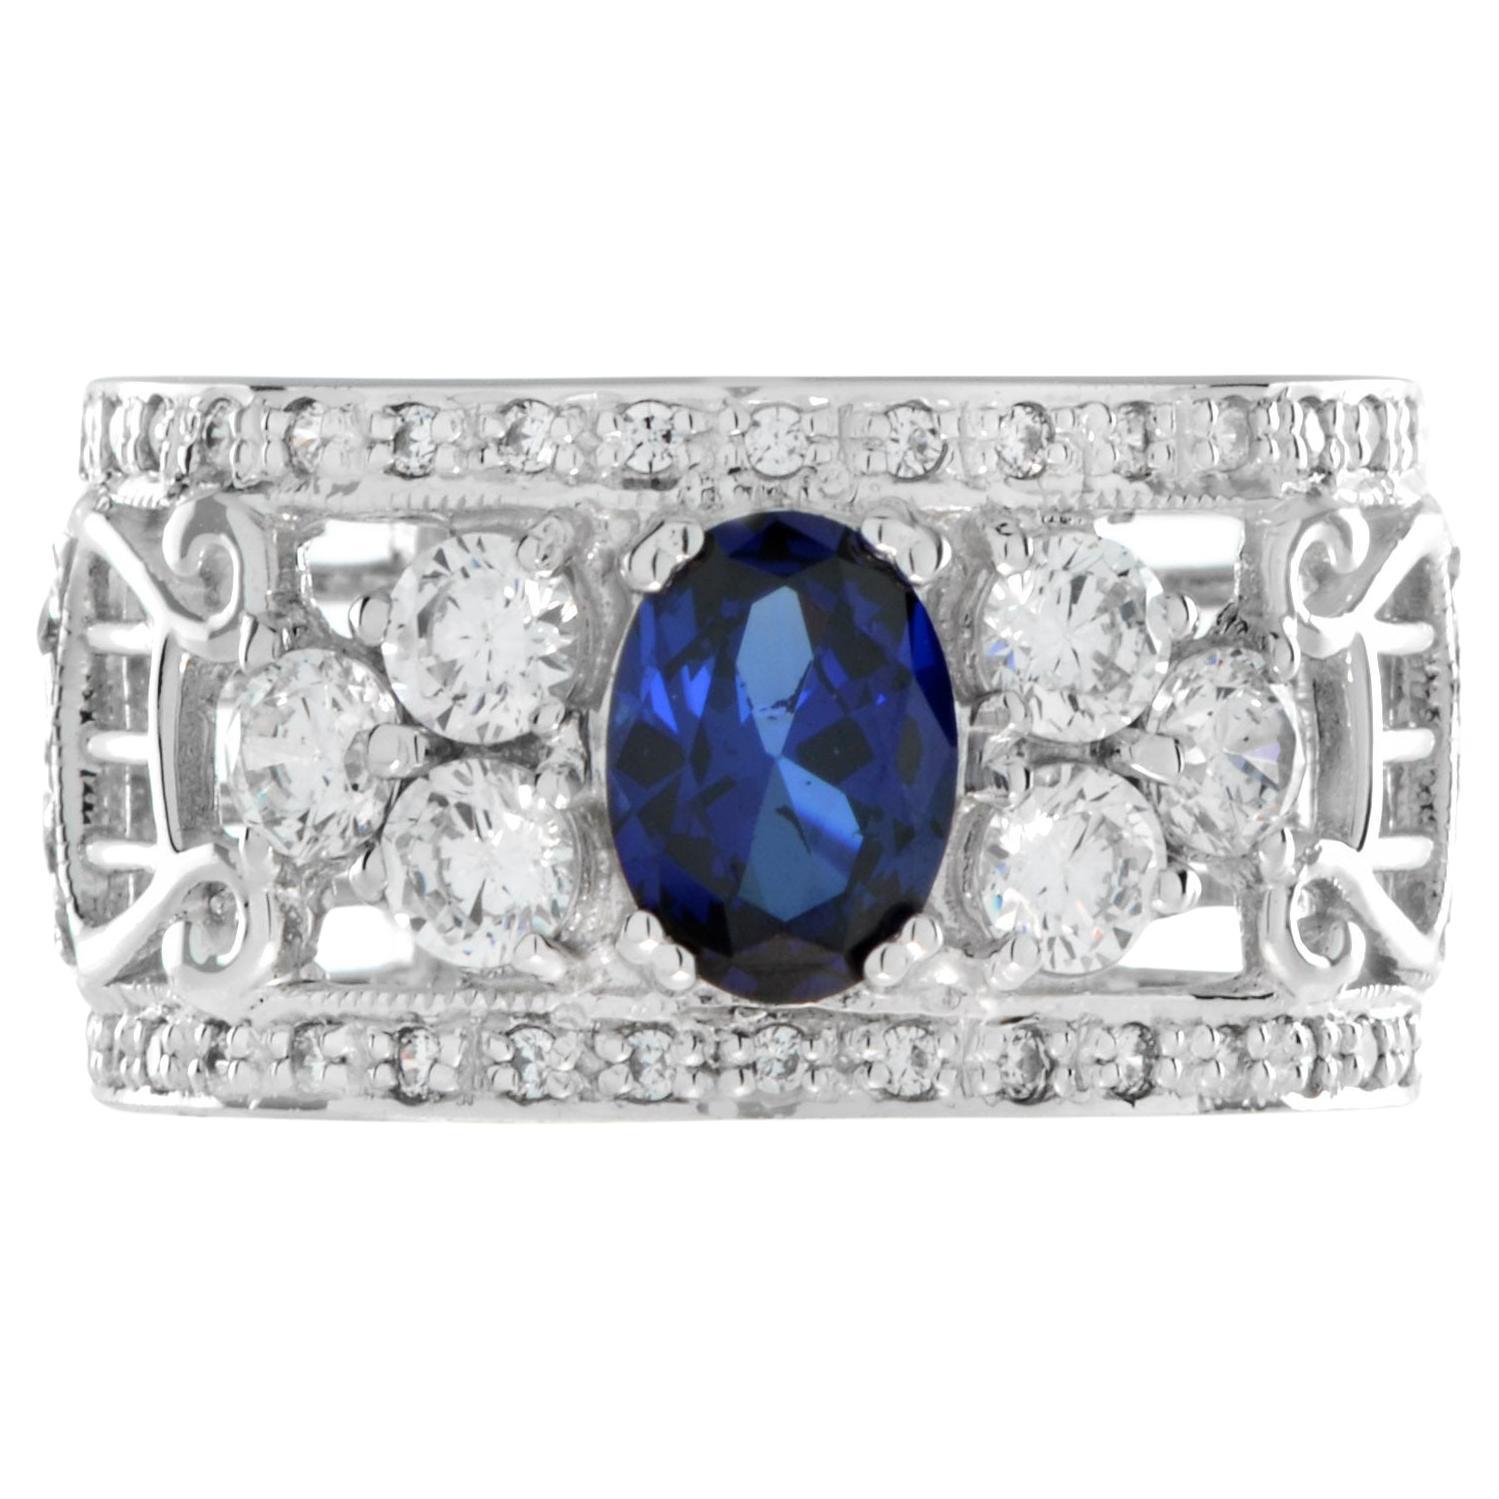 Blue Sapphire and Diamond Wide Band Ring in 18K White Gold